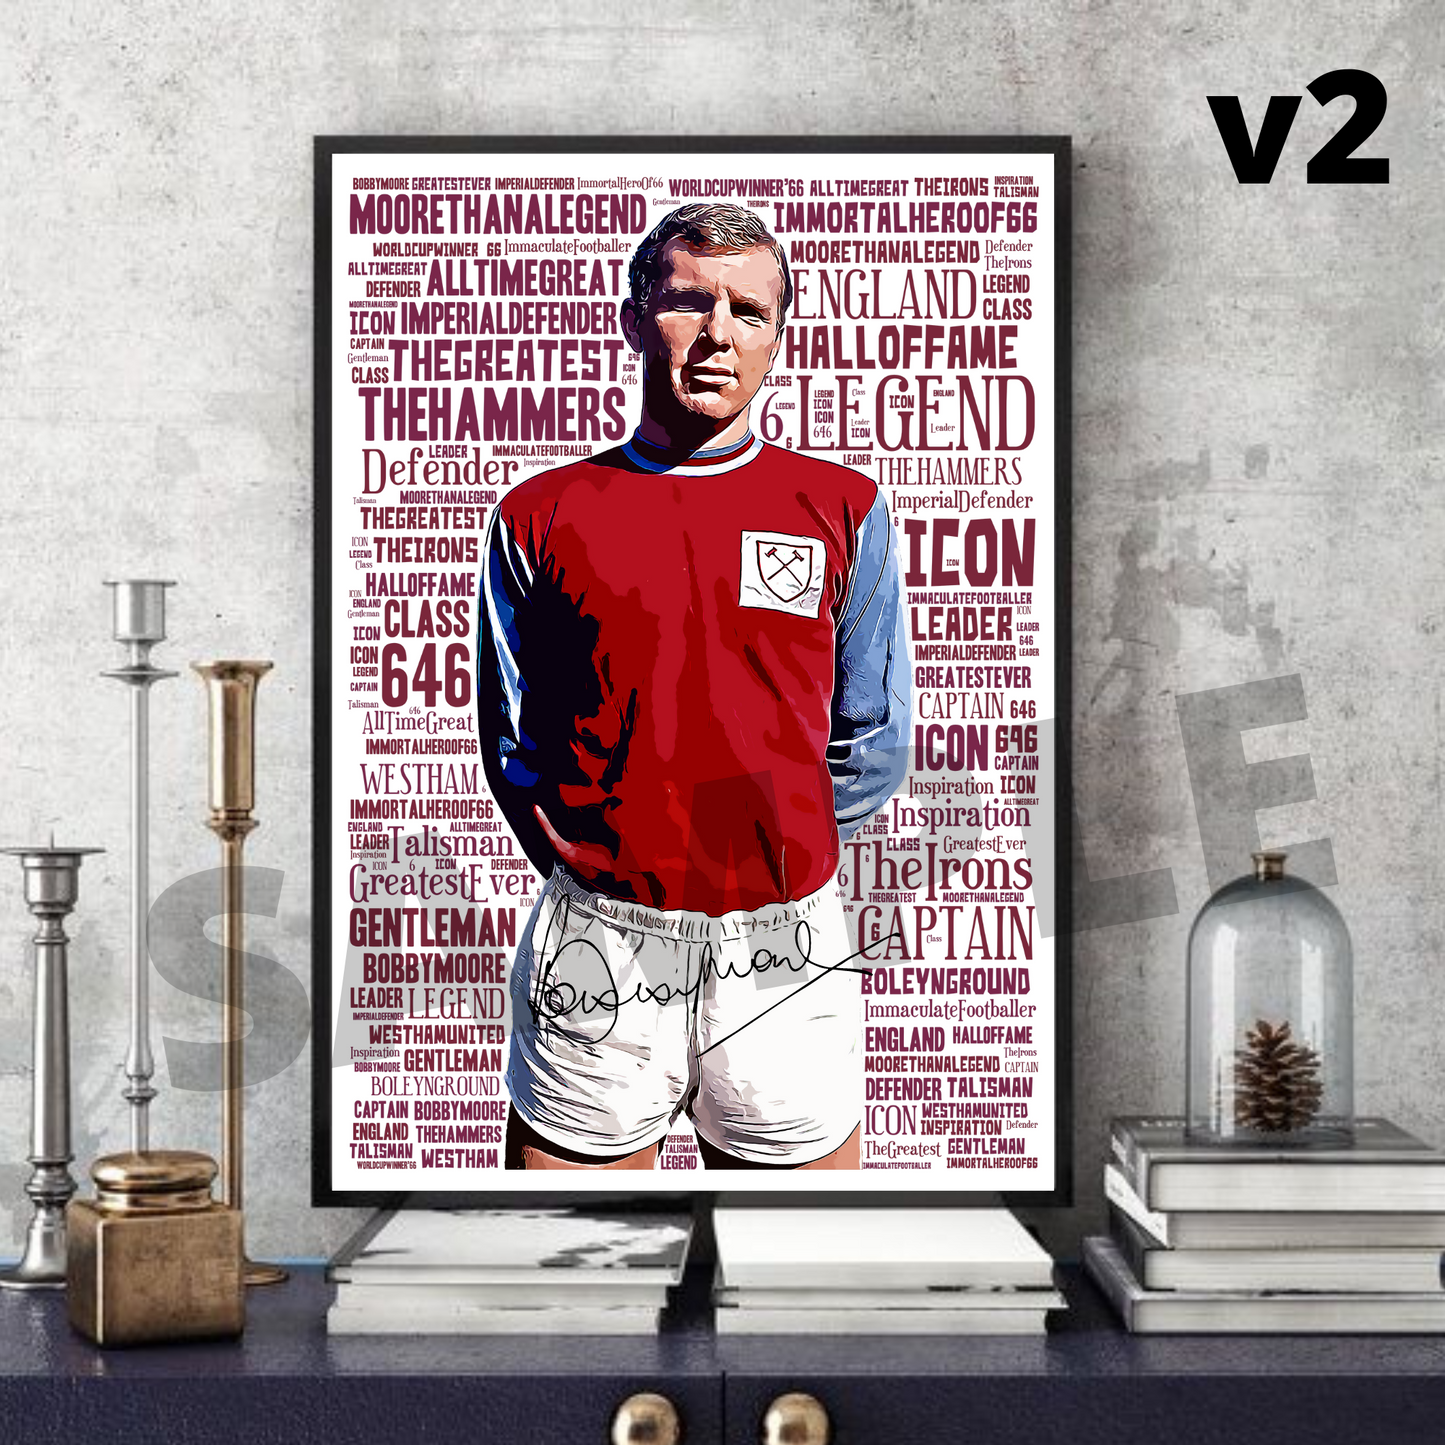 Bobby Moore Art West Ham Utd A4/A3 Football/Memorabilia/Collectable/Gift signed